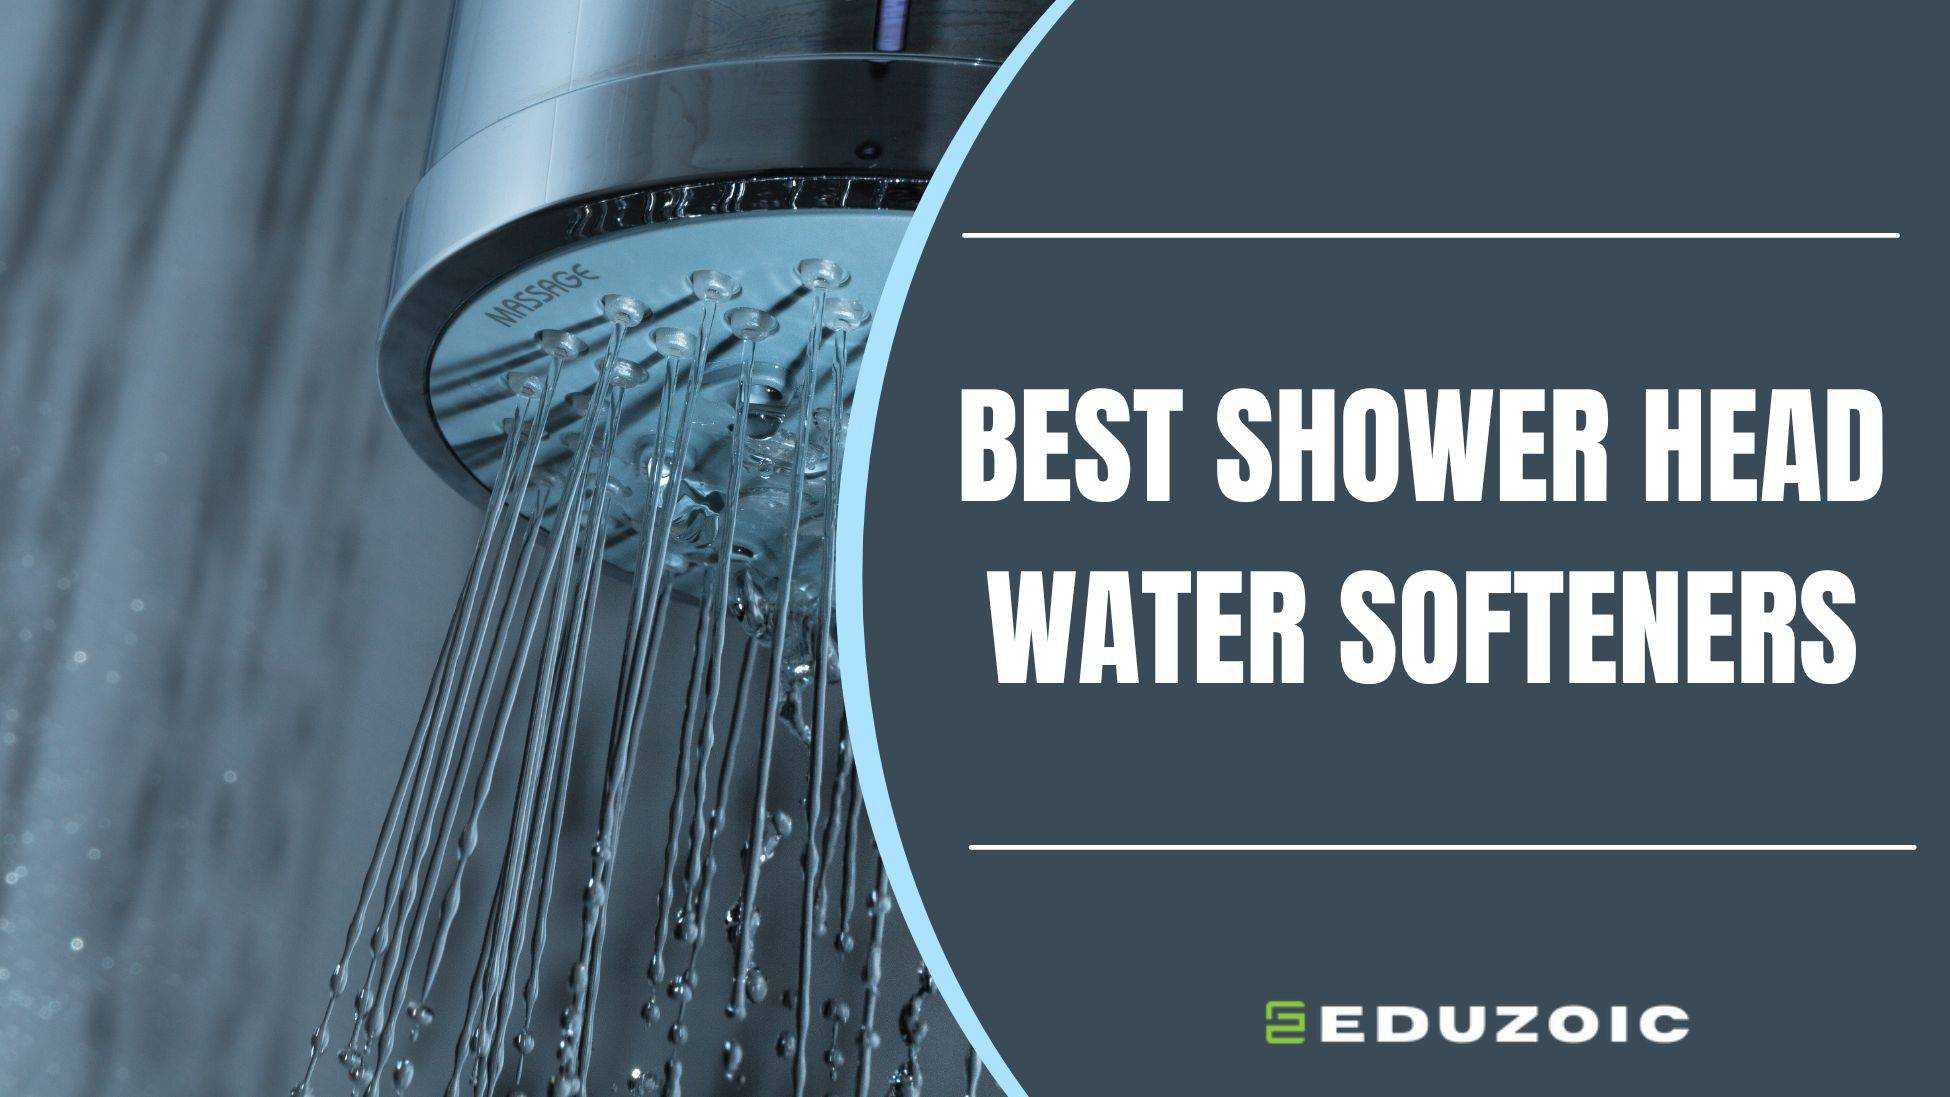 Best Shower Head Water Softeners: Say Goodbye to Dry, Damaged Hair